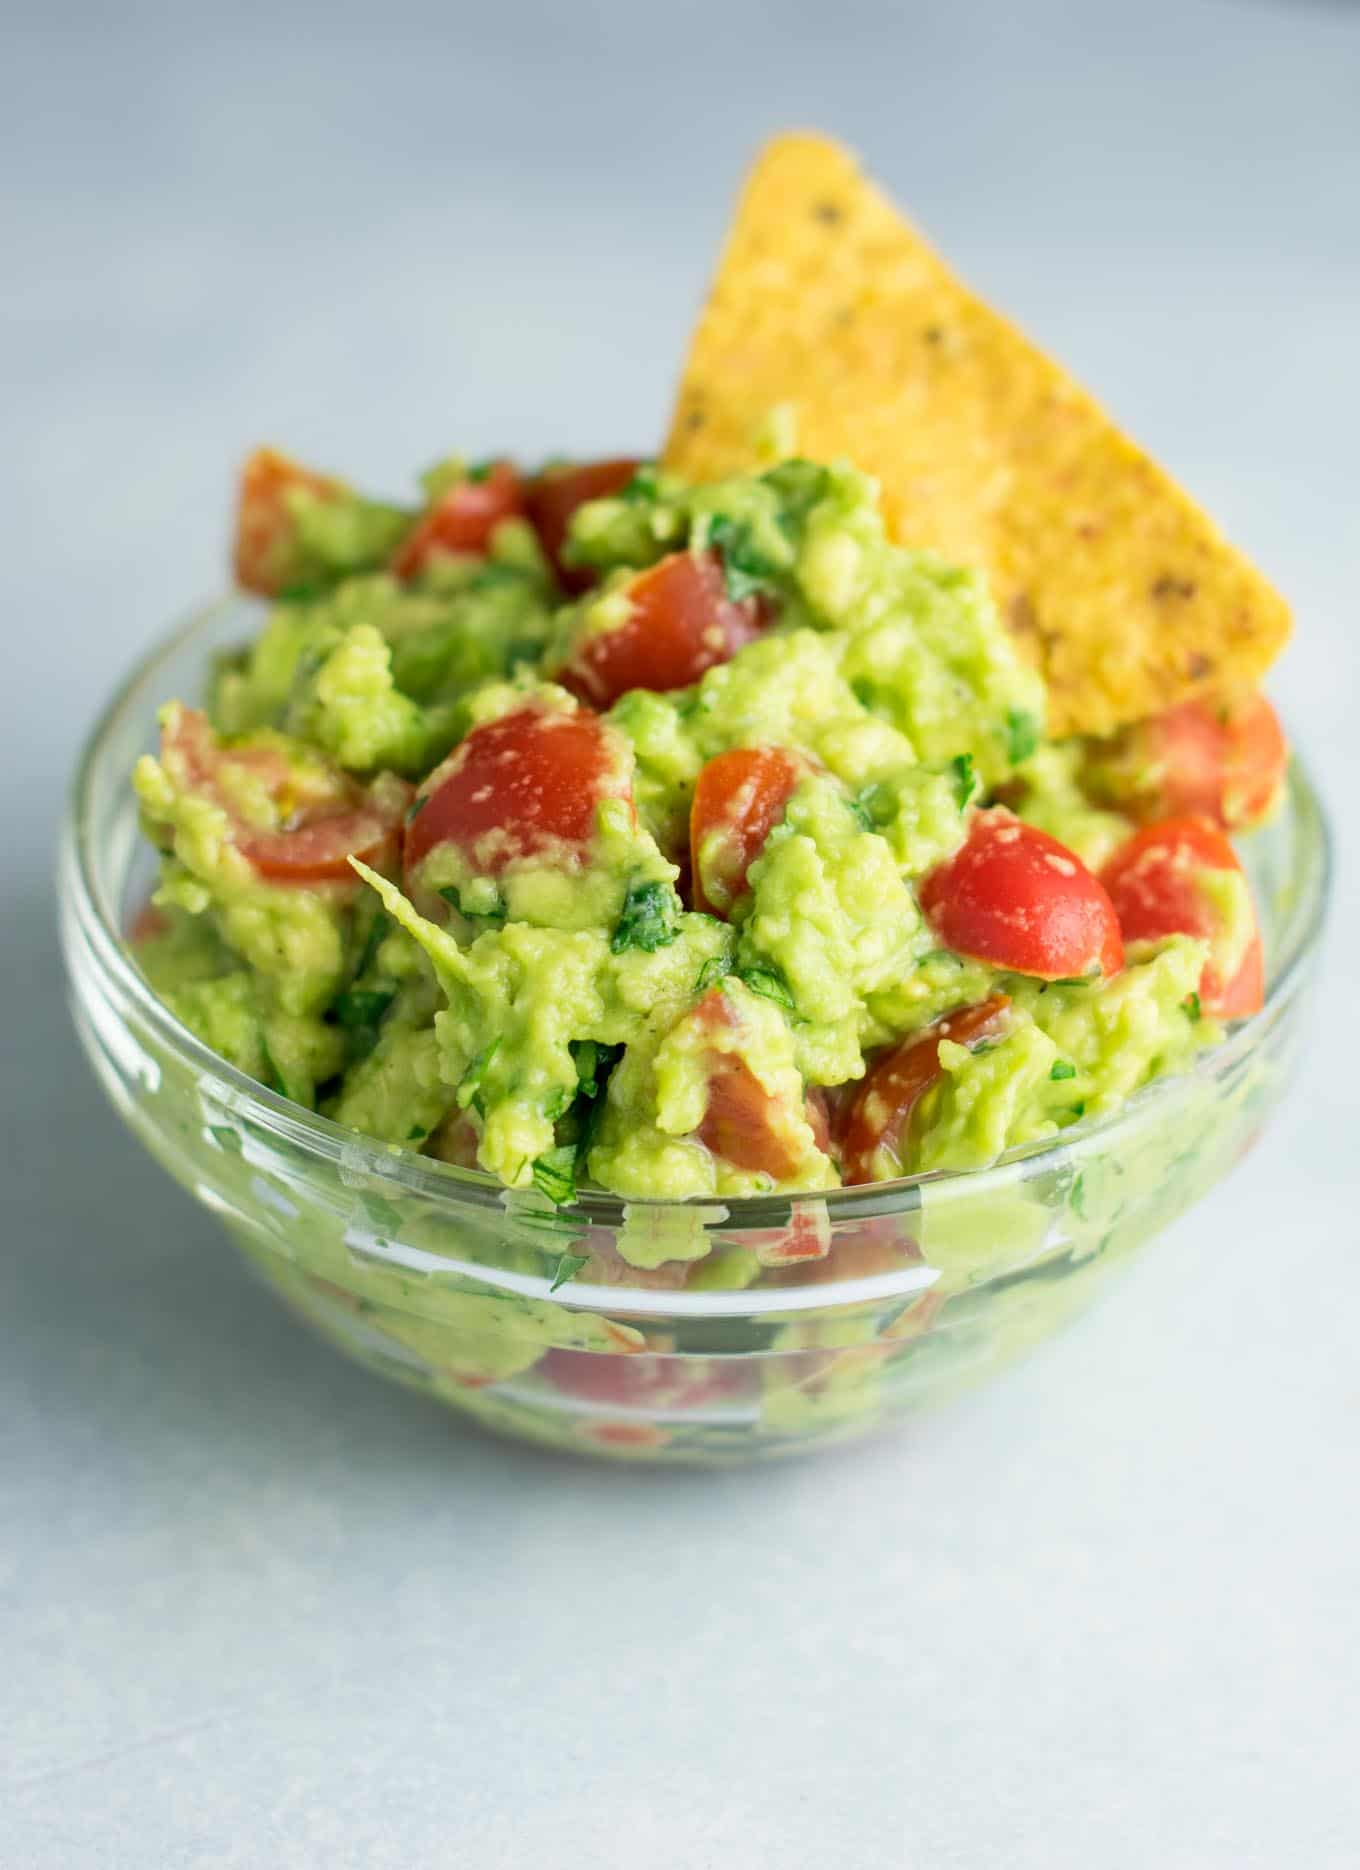 Best Guacamole Recipe - easy and healthy - Build Your Bite